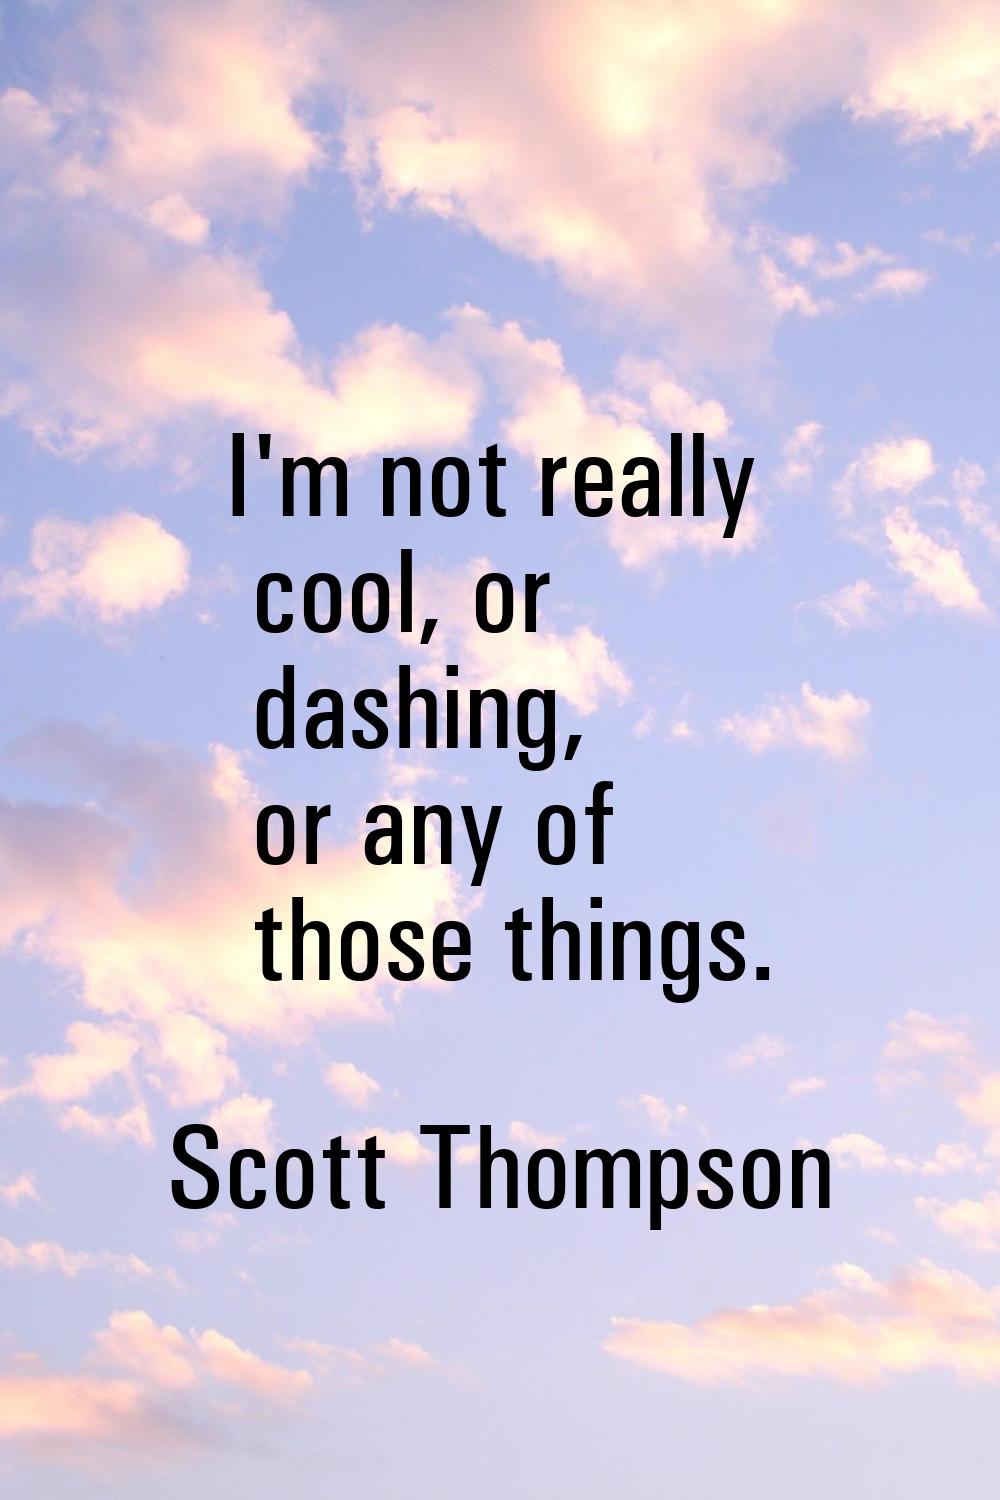 I'm not really cool, or dashing, or any of those things.